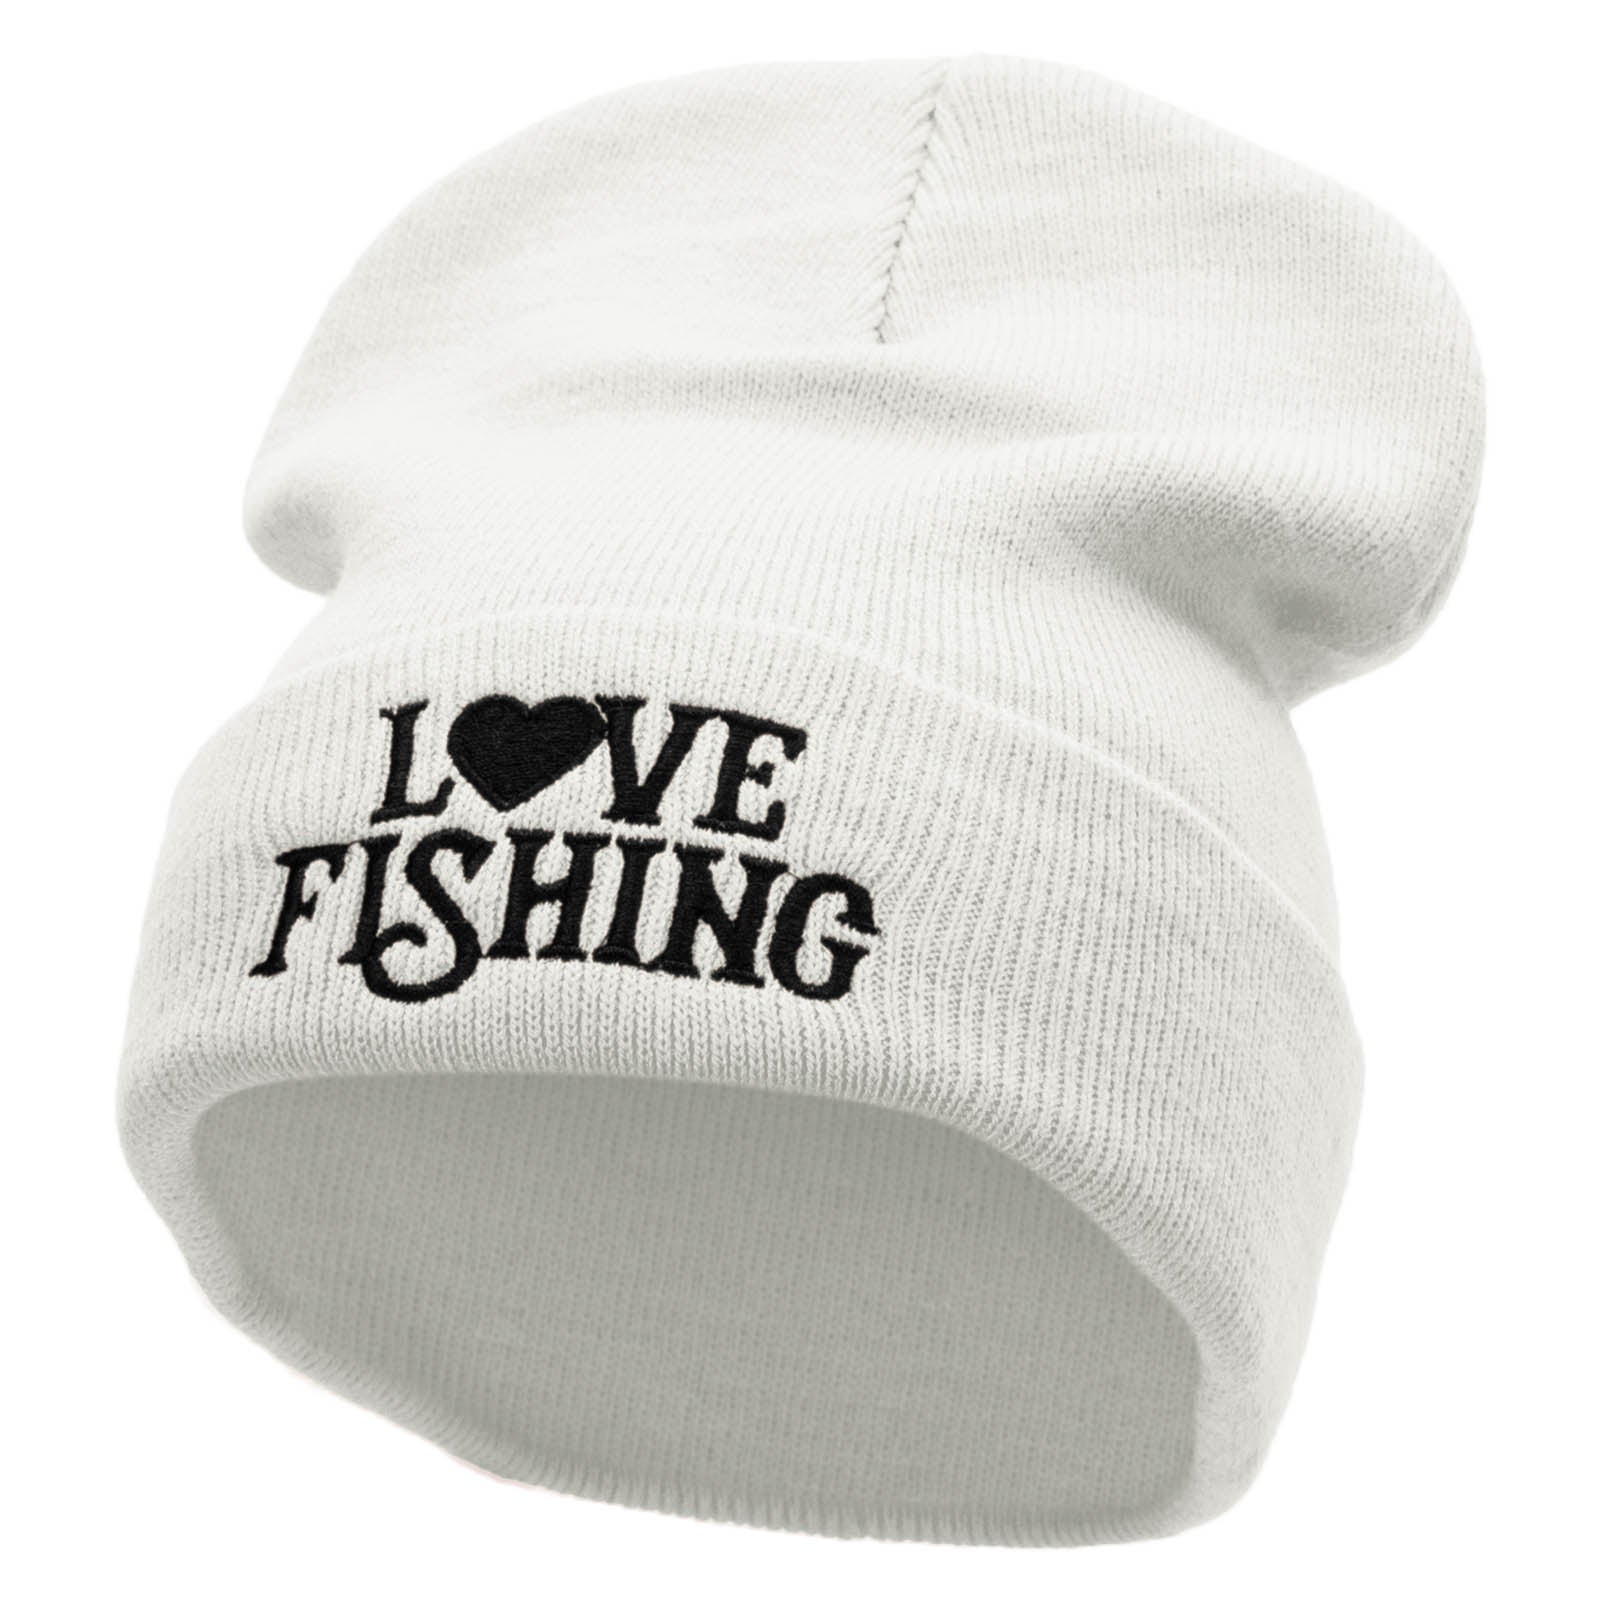 Heart Fishing Embroidered 12 Inch Long Knitted Beanie - White OSFM